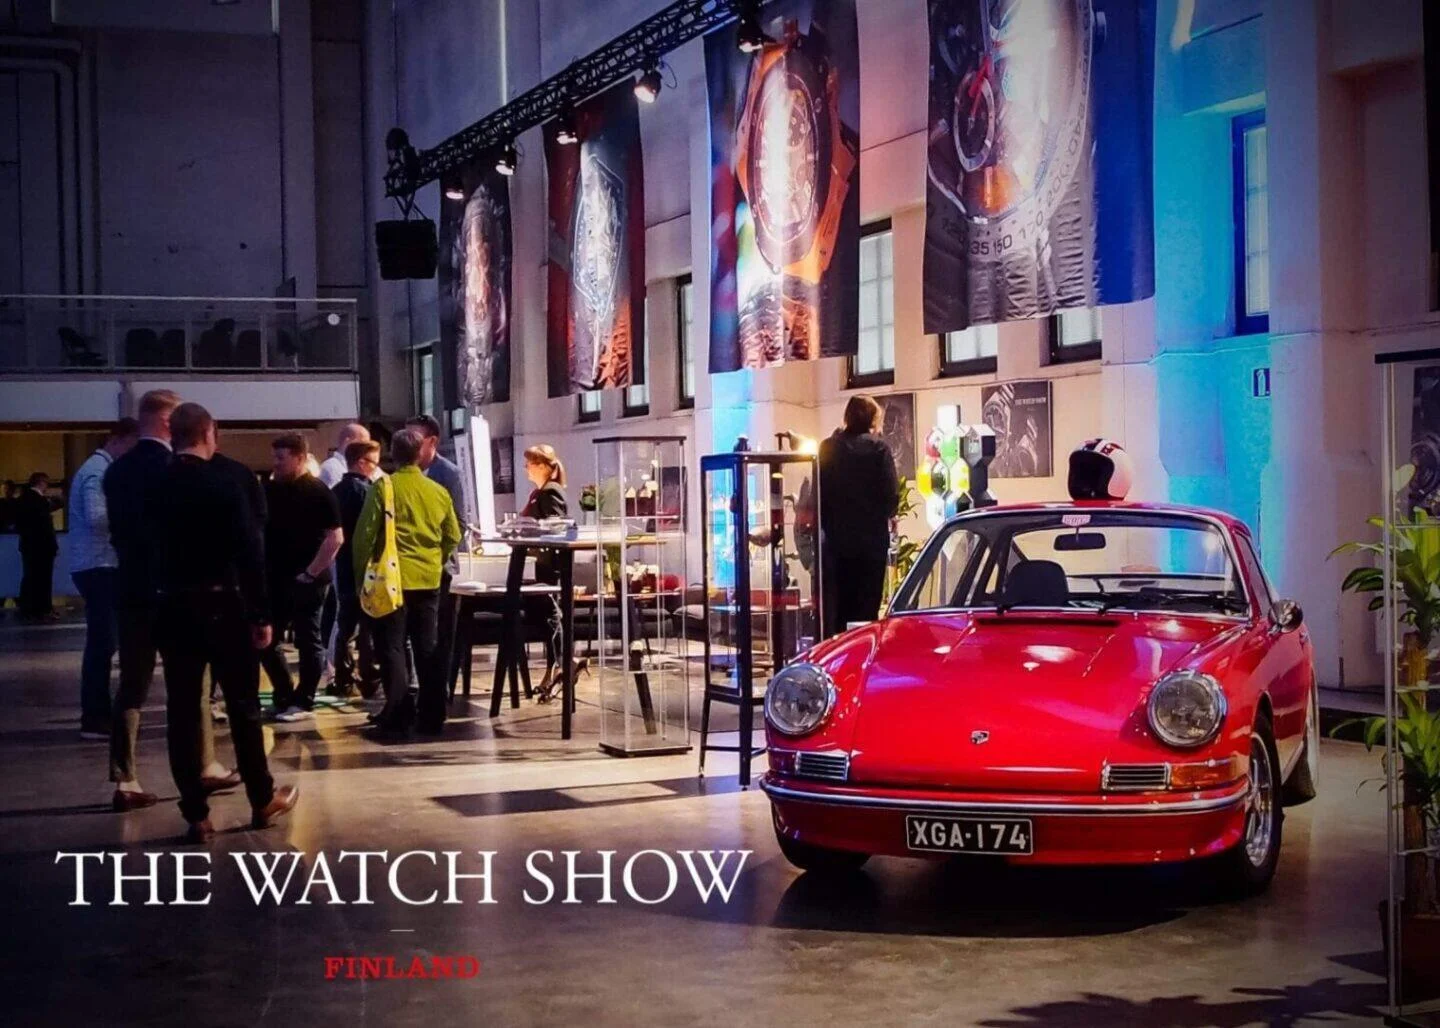 The Watch Show Finland